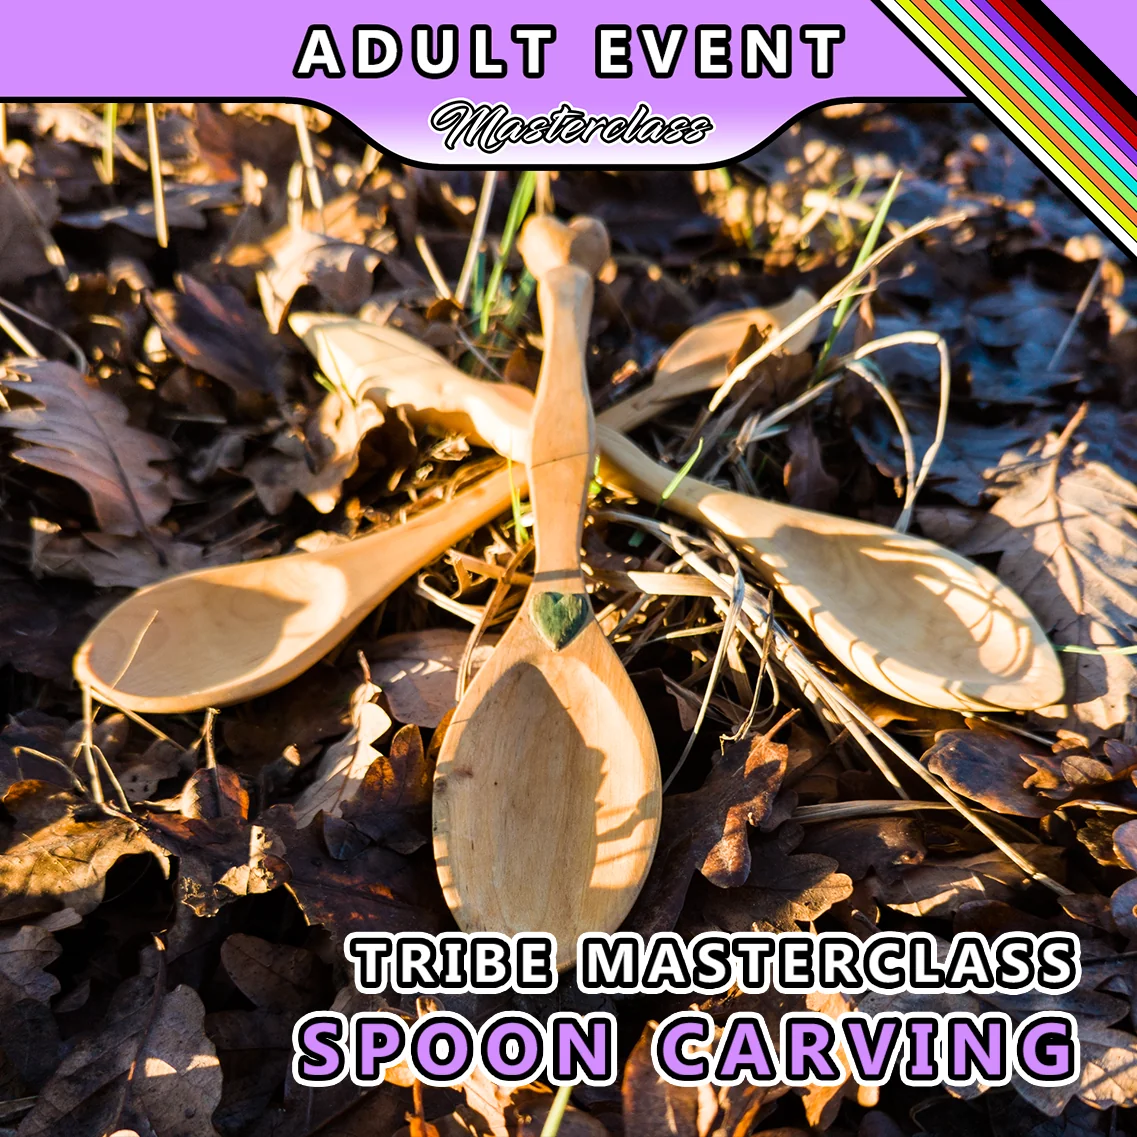 Spoon carving masterclass learn to craft a beautiful spoon out of wood at TRIBE with HONOURS